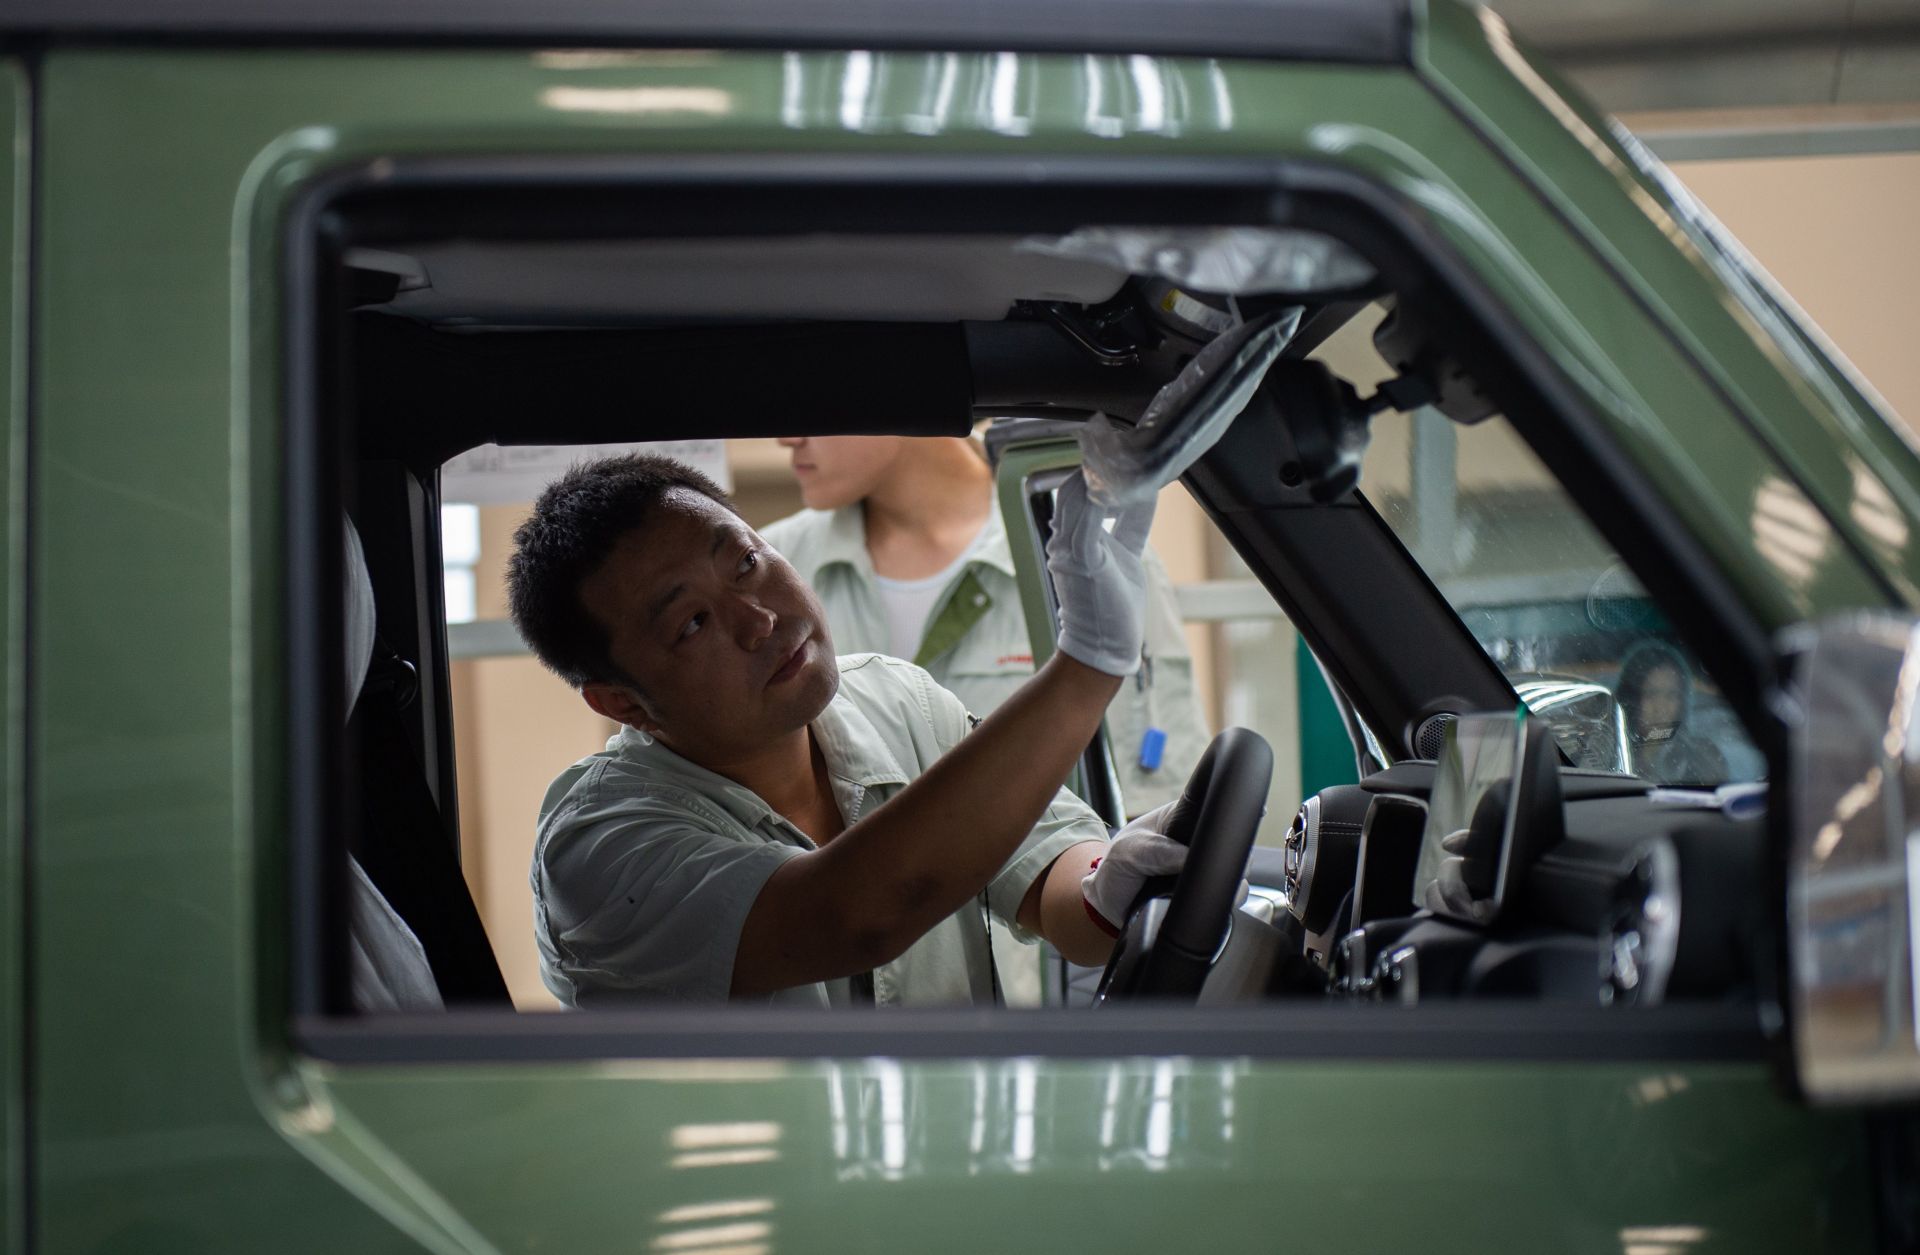 A Chinese autoworker is pictured on an SUV production line for the BAIC Motor Corp. on Aug. 29, 2018.